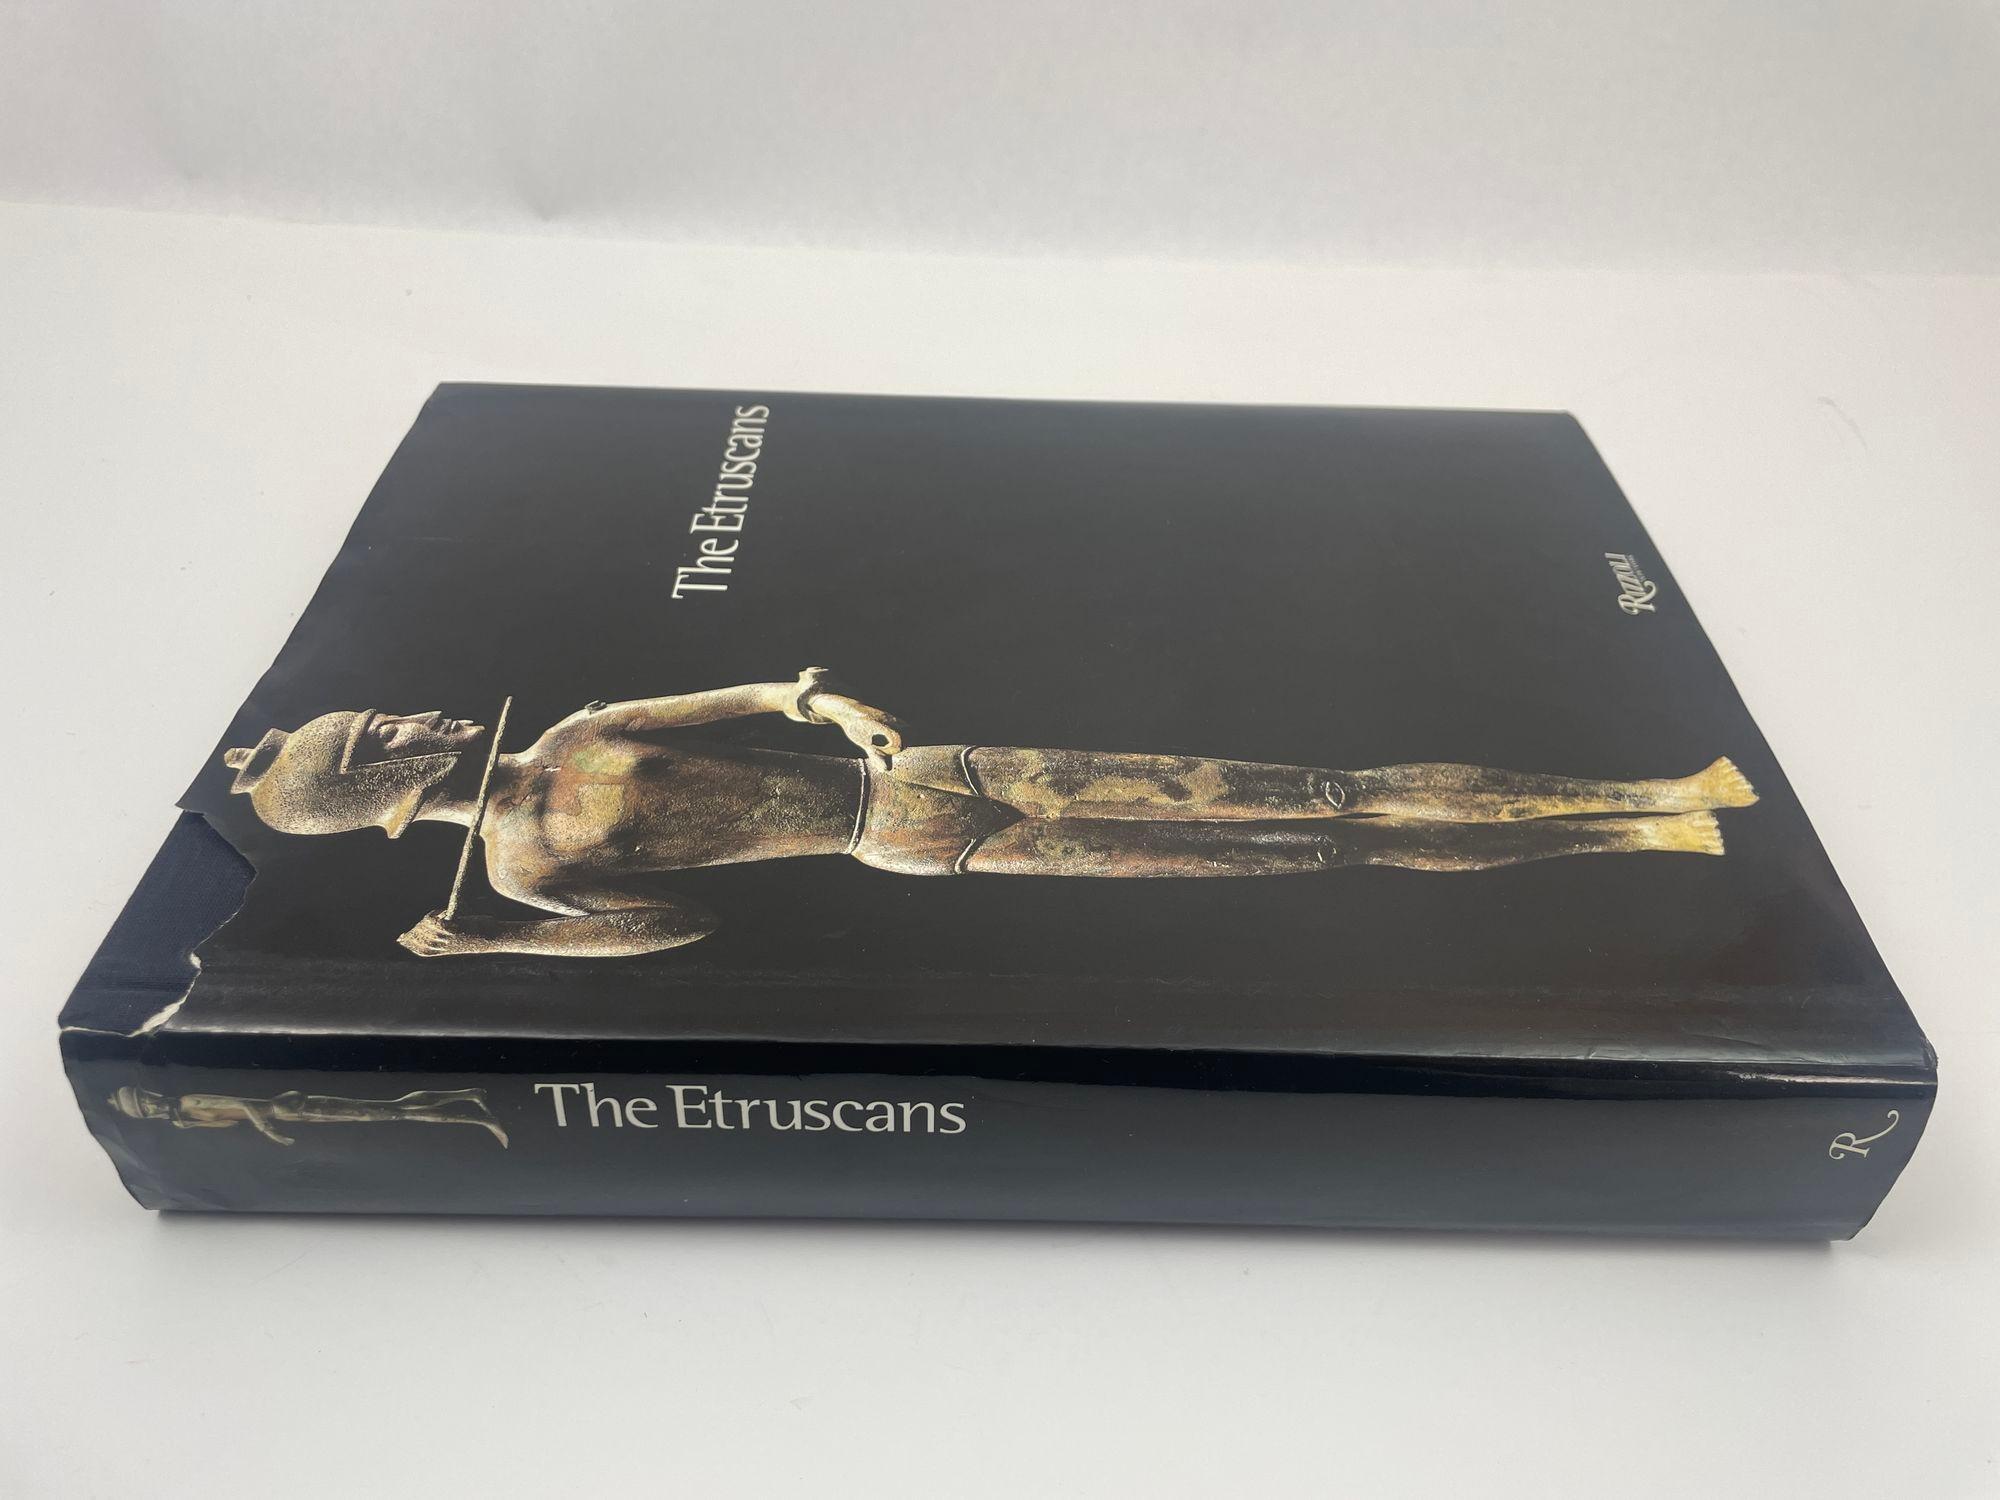 Expressionist The Etruscans Hardcover Book by Mario Torelli 1st Ed. 2001 Rizzoli For Sale